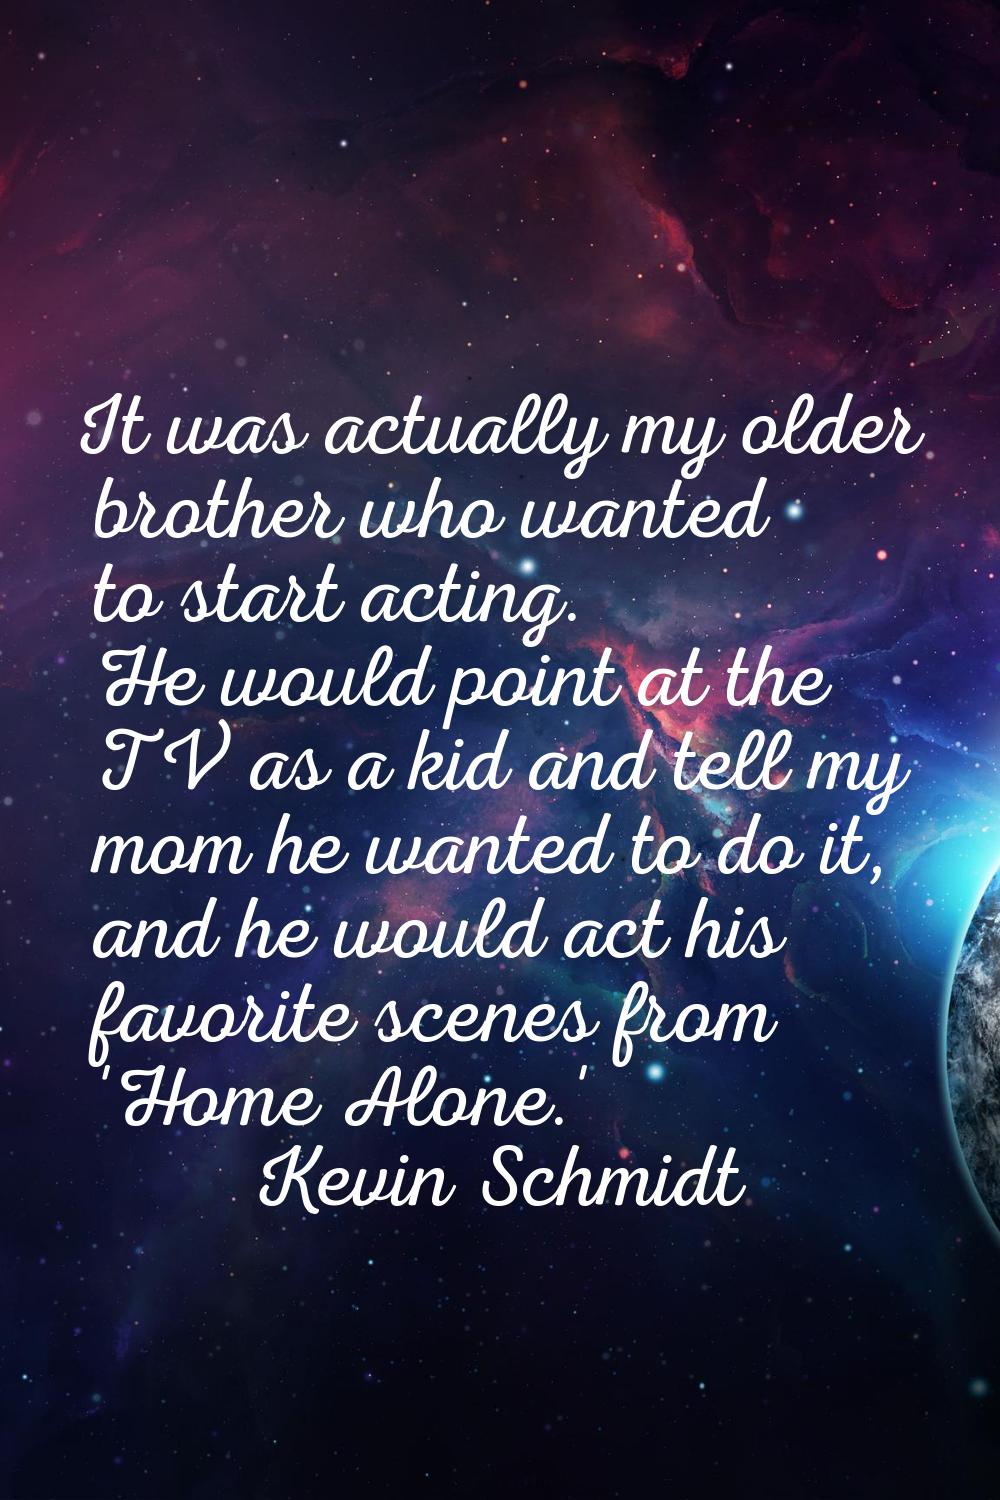 It was actually my older brother who wanted to start acting. He would point at the TV as a kid and 